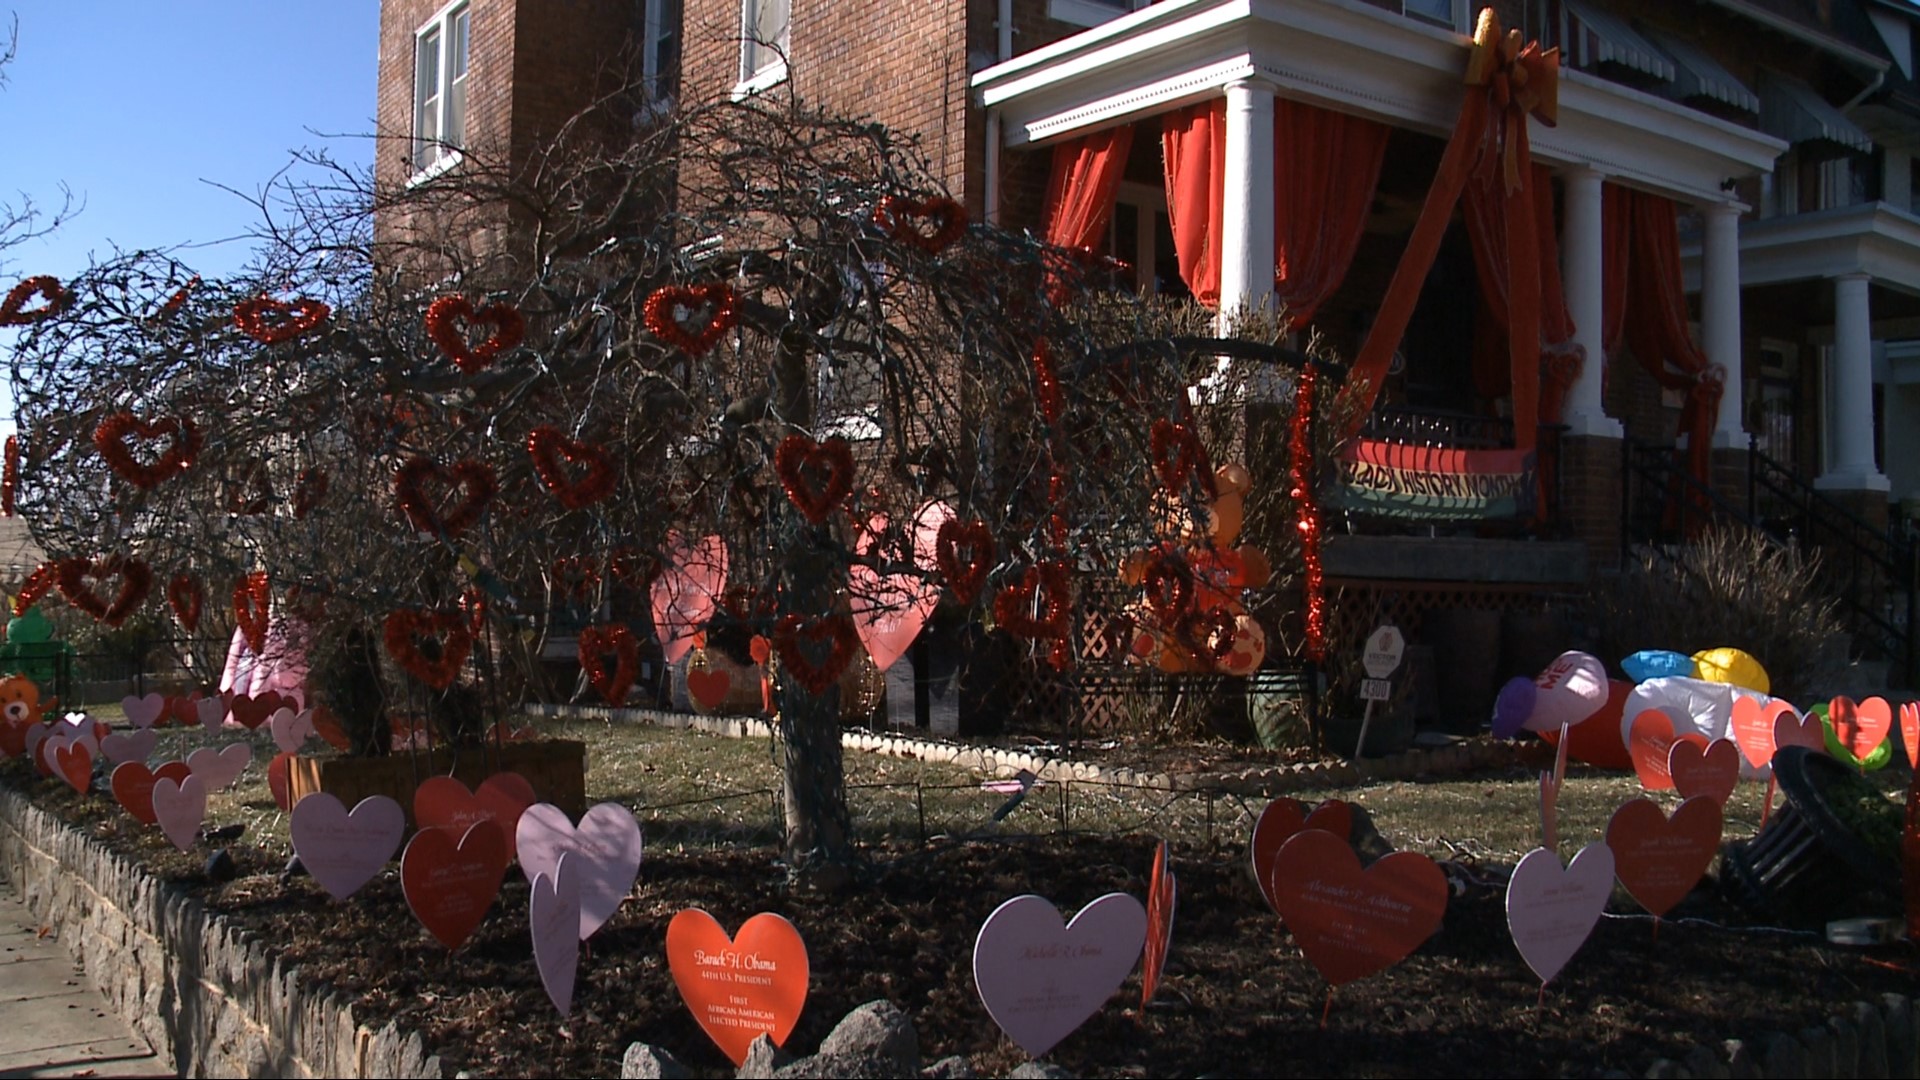 One woman hopes to inspire love and curiosity with a yard display celebrating figures in Black history combined with Valentine's Day.